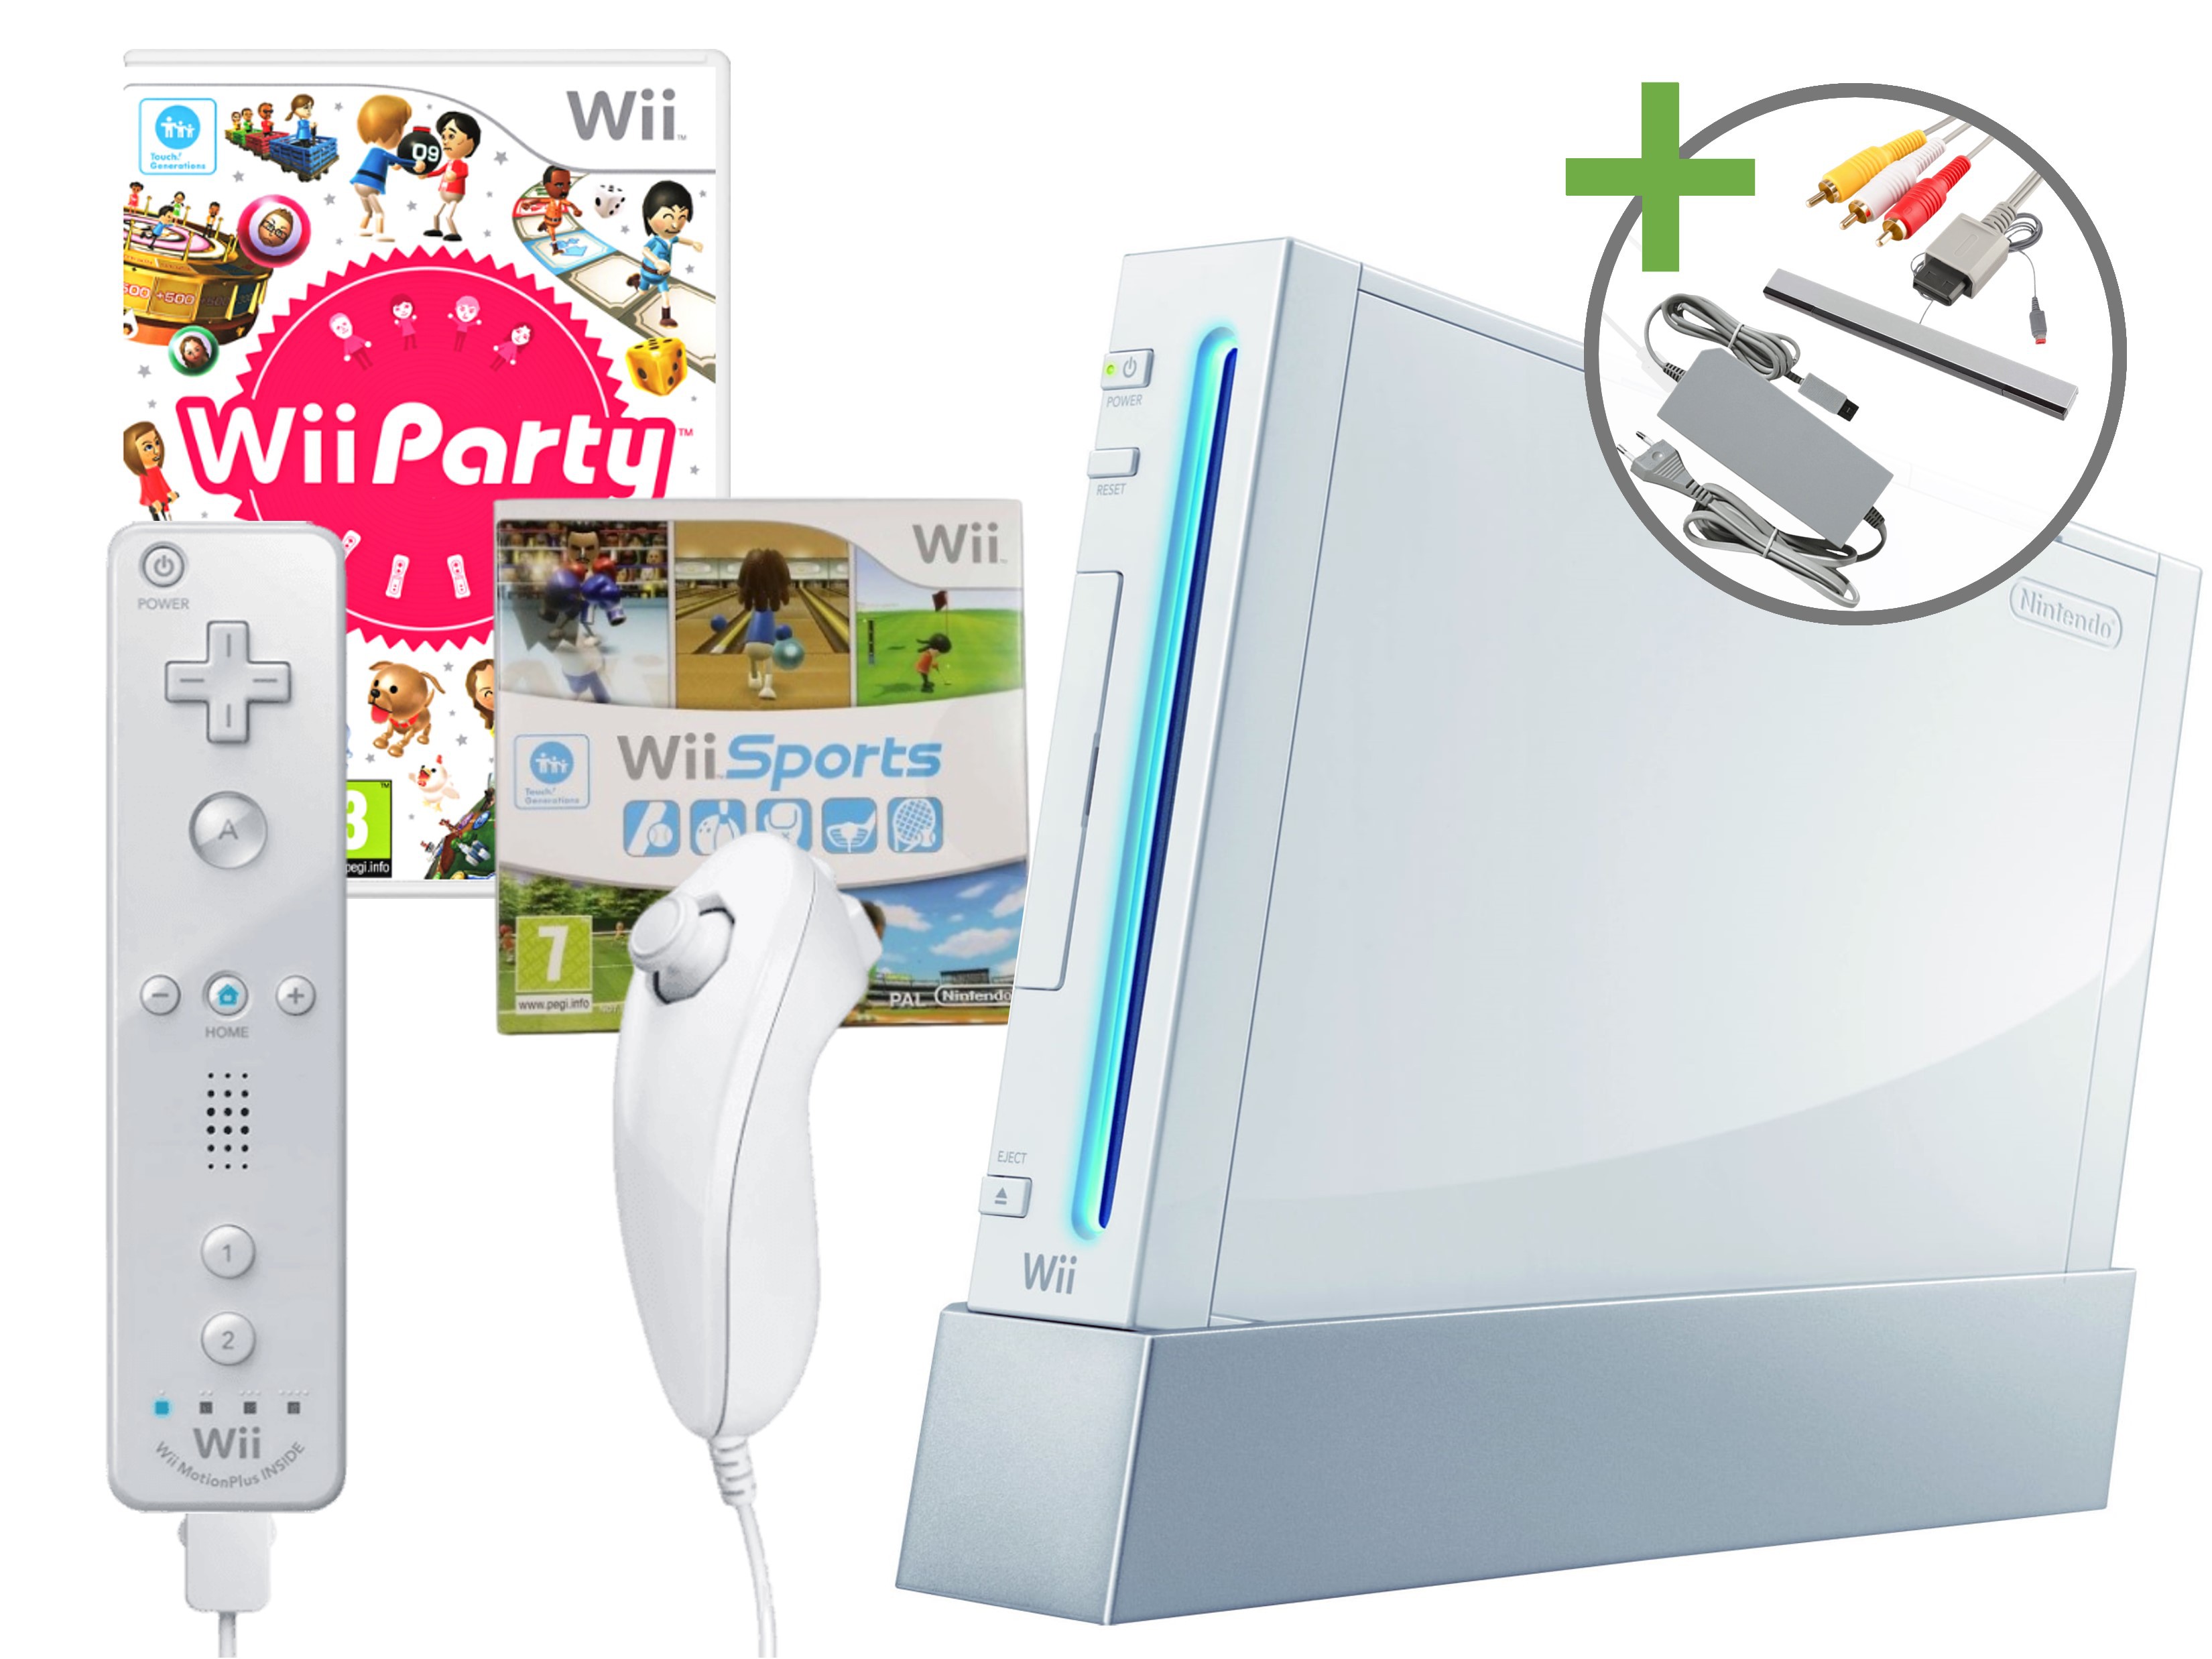 Nintendo Wii Starter Pack - Wii Family Edition [Complete] - Wii Hardware - 2